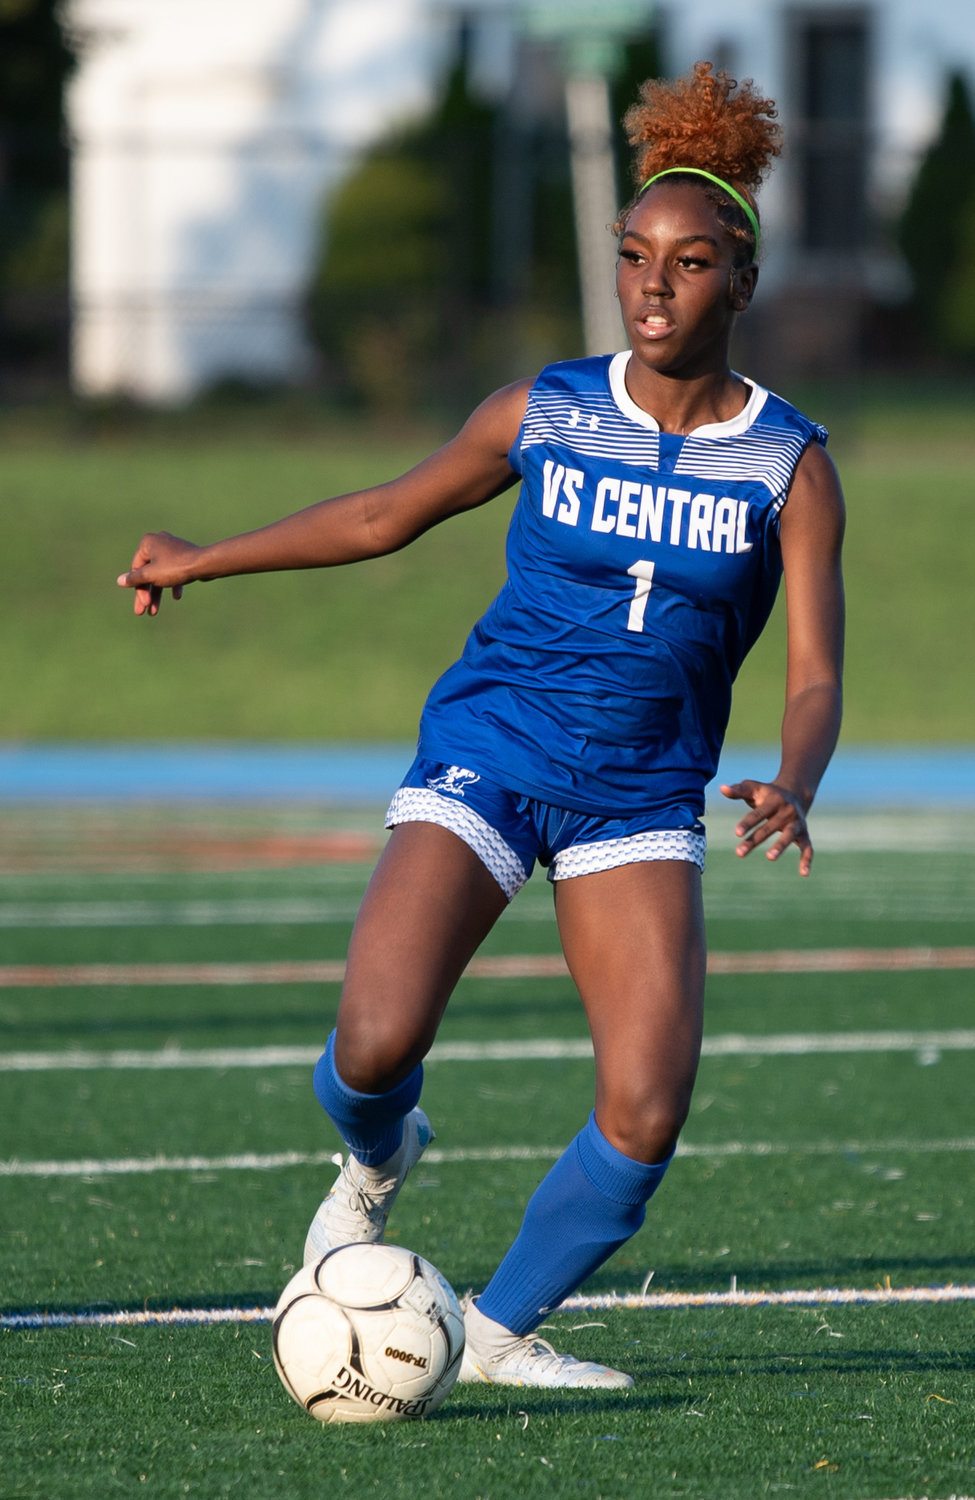 Junior forward Madison Galette, one of five returning starters for the Eagles, is off to a flying start with 7 goals and 4 assists.